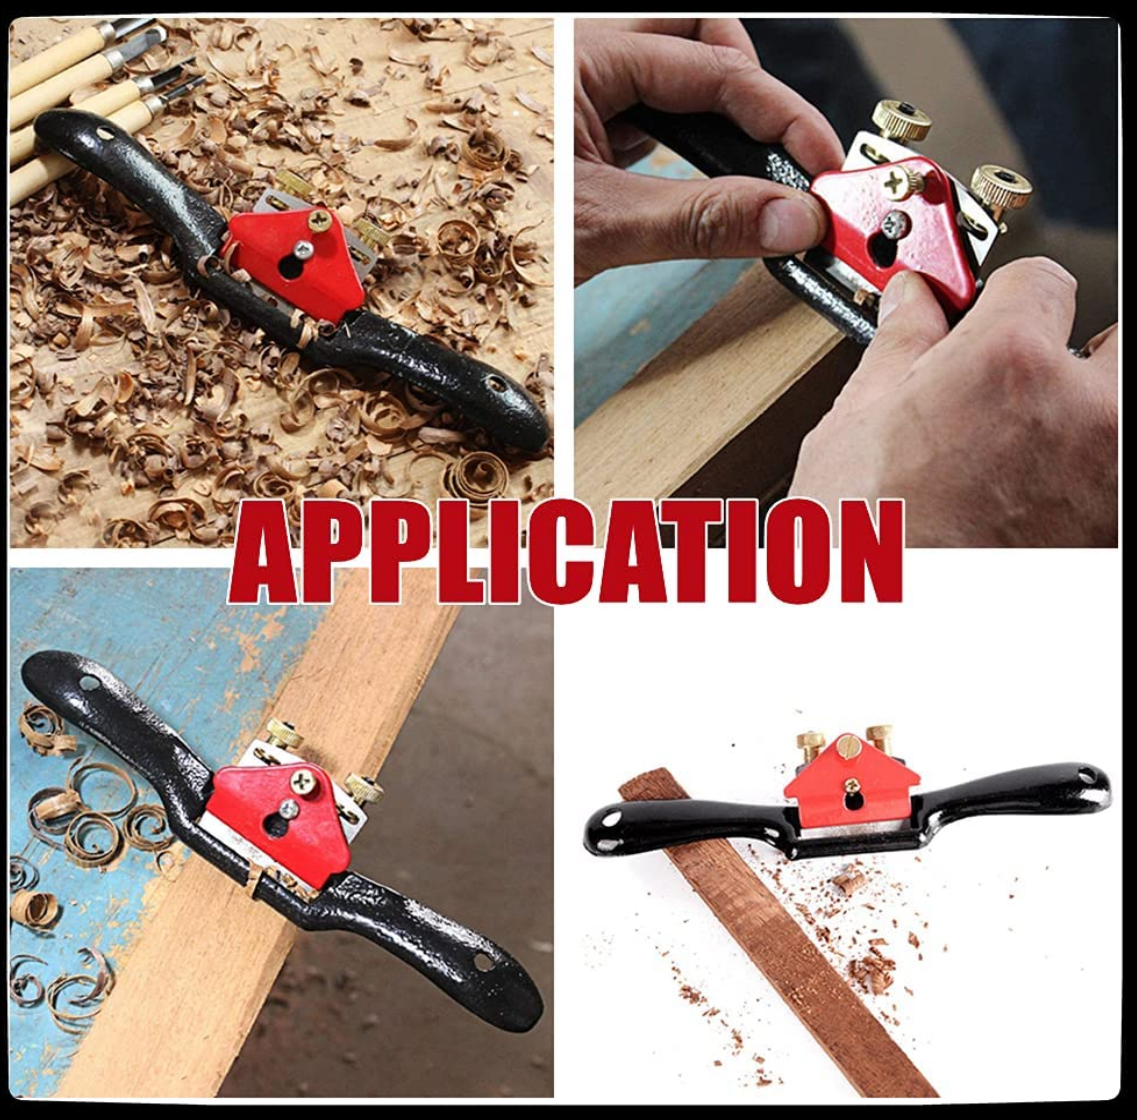 WELLHOME Woodworking Planer Adjustable Spokeshave Woodworking Plane Trimming Tools Hand Cutting Edge Chisel Carpenter Manual Accessories DIY